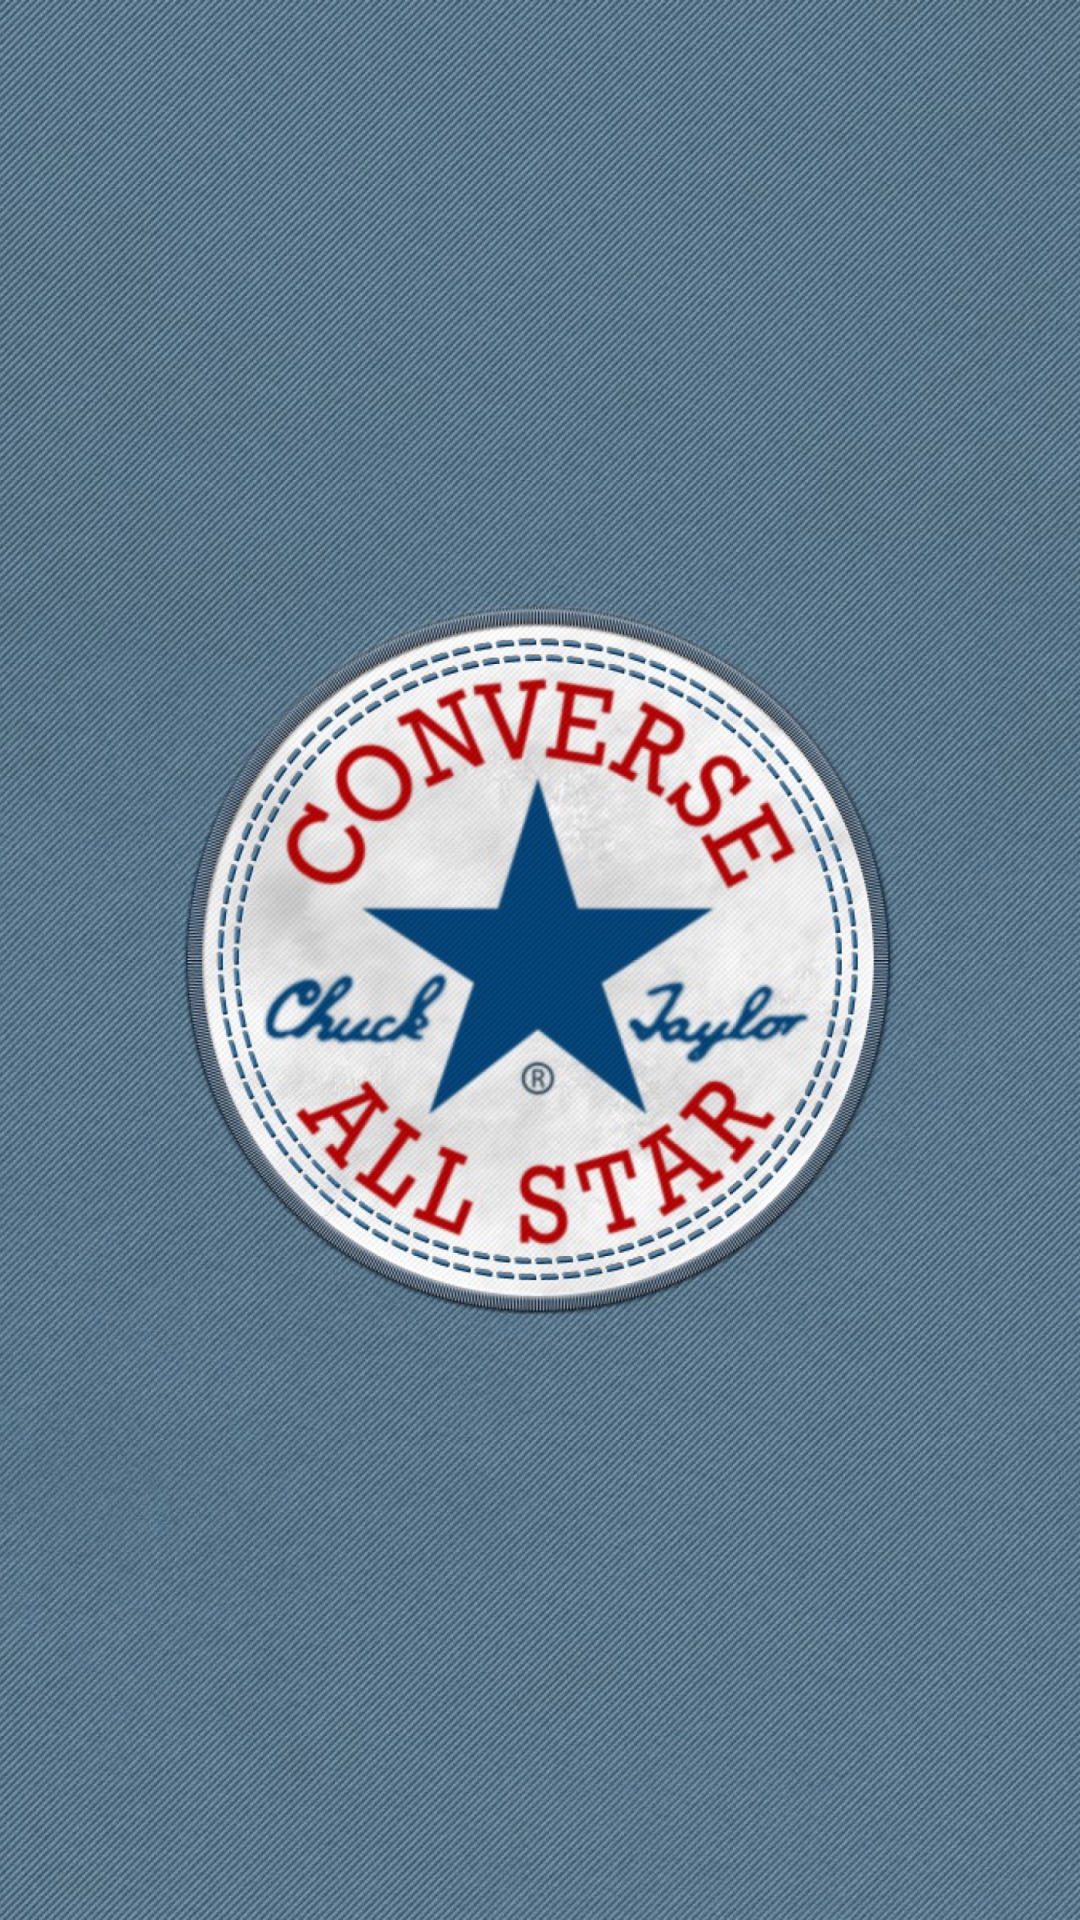 Converse Logo Wallpaper for iPhone 6 Plus